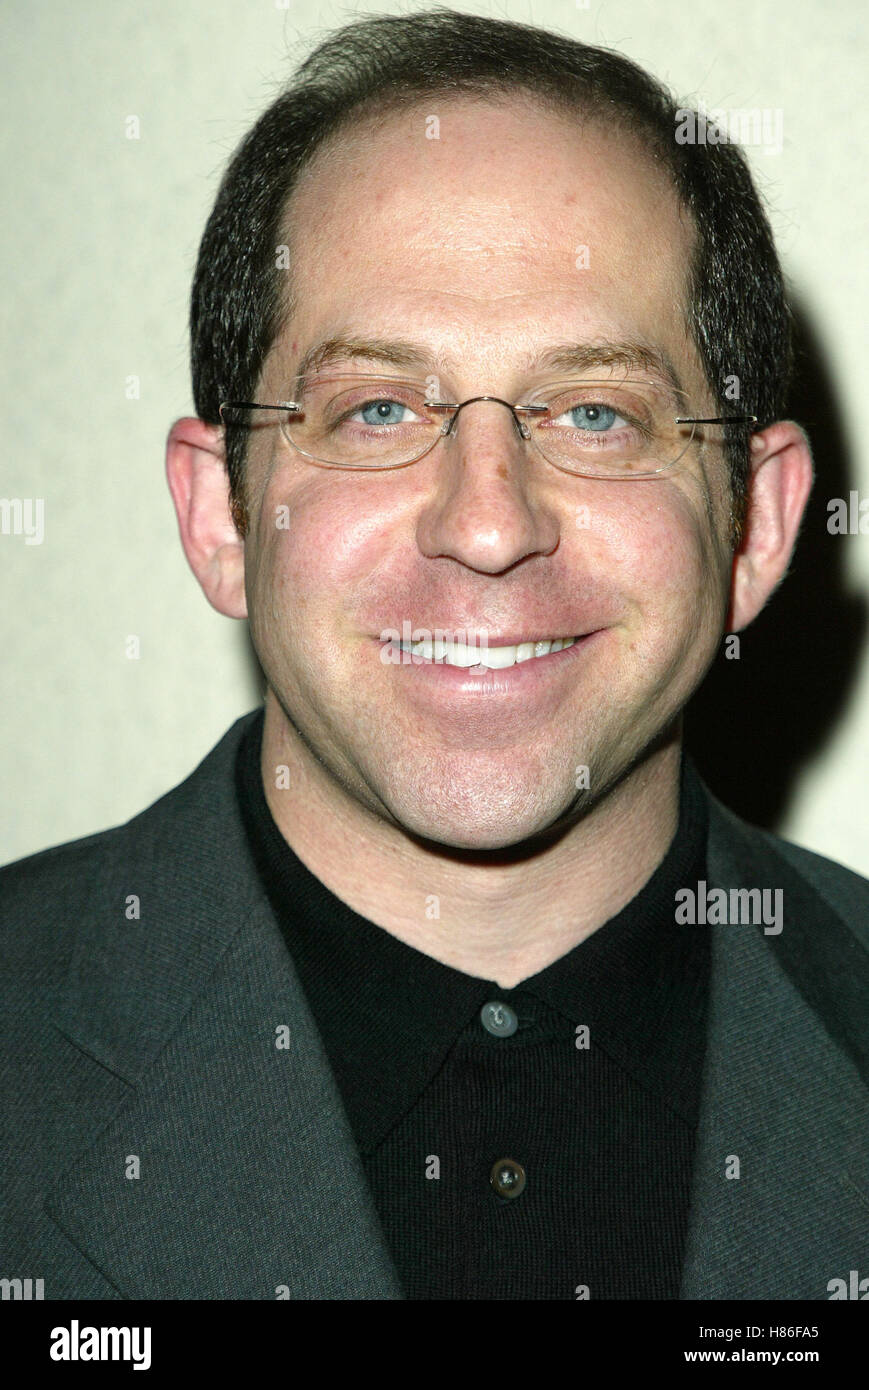 JASON KRAVITS NORBY WALTERS HOLIDAY PARTY FRIARS CLUB BEVERLY HILLS LOS ANGELES US 24 November 2002 Stock Photo